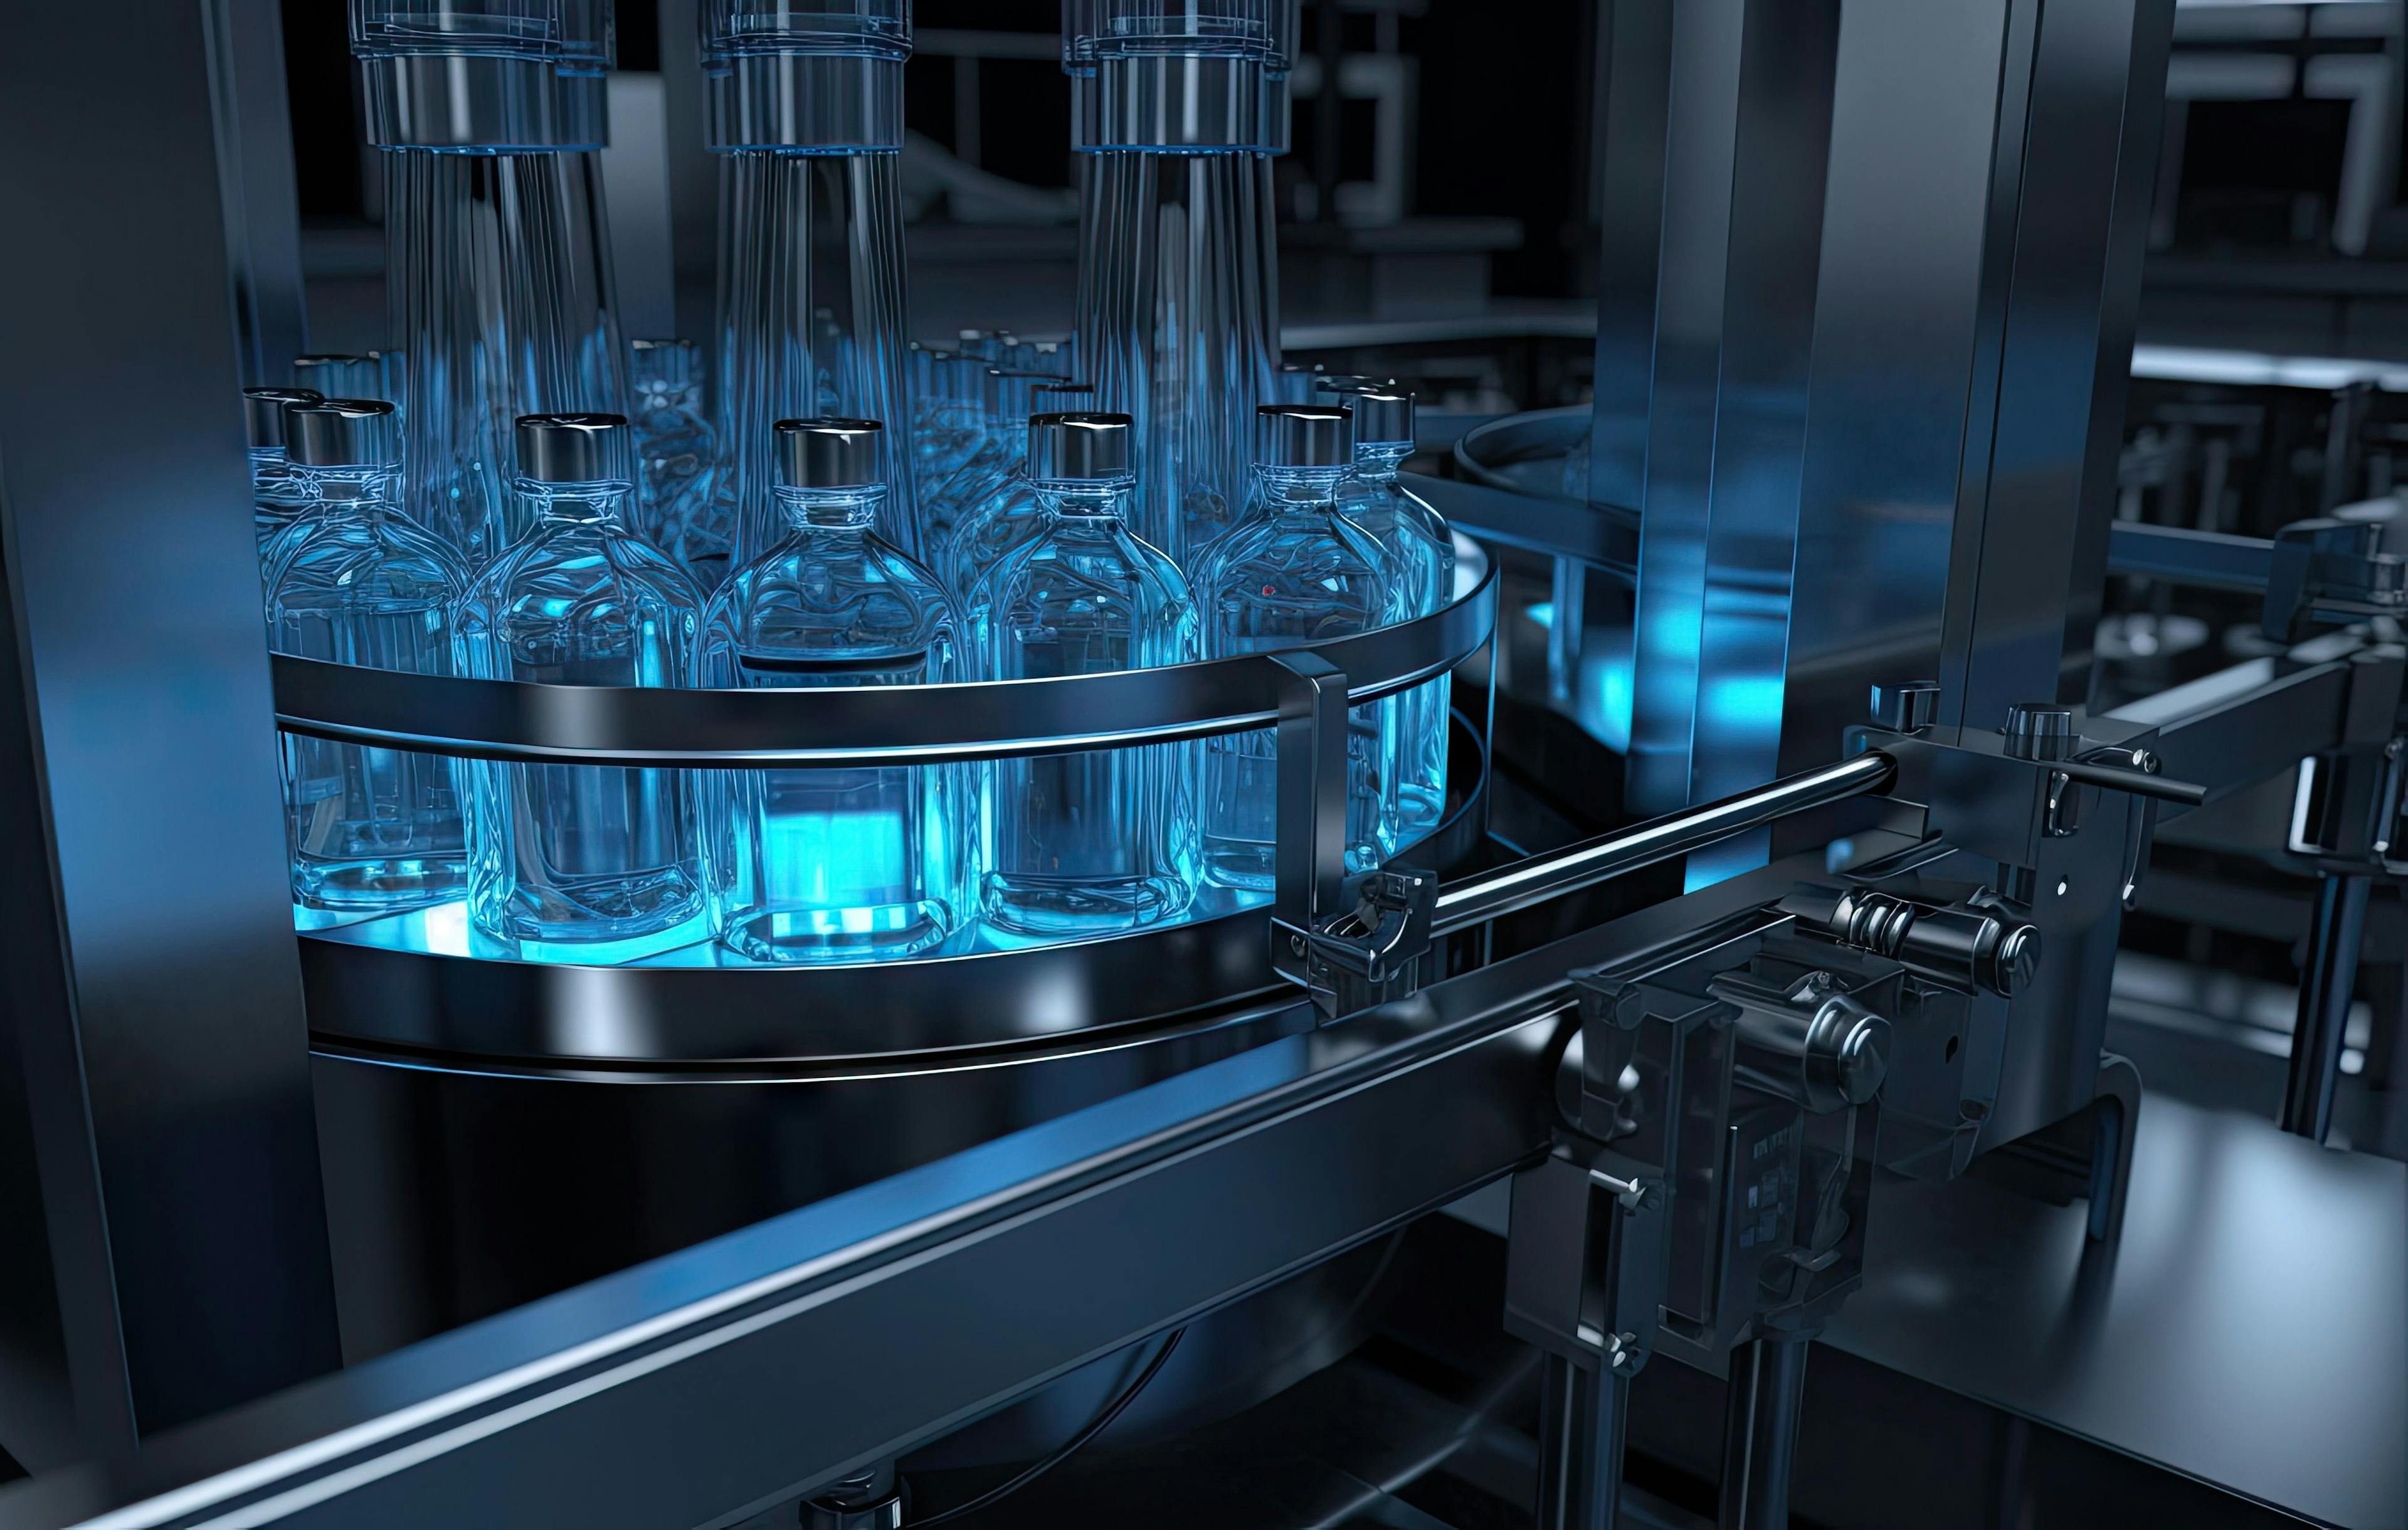 Macro Shot of Medical Ampoule Production Line at Modern Modern Pharmaceutical Factory. Glass Ampoules are being Filled. Medication Manufacturing Process. Image Credit: Adobe Stock Images/pvl0707